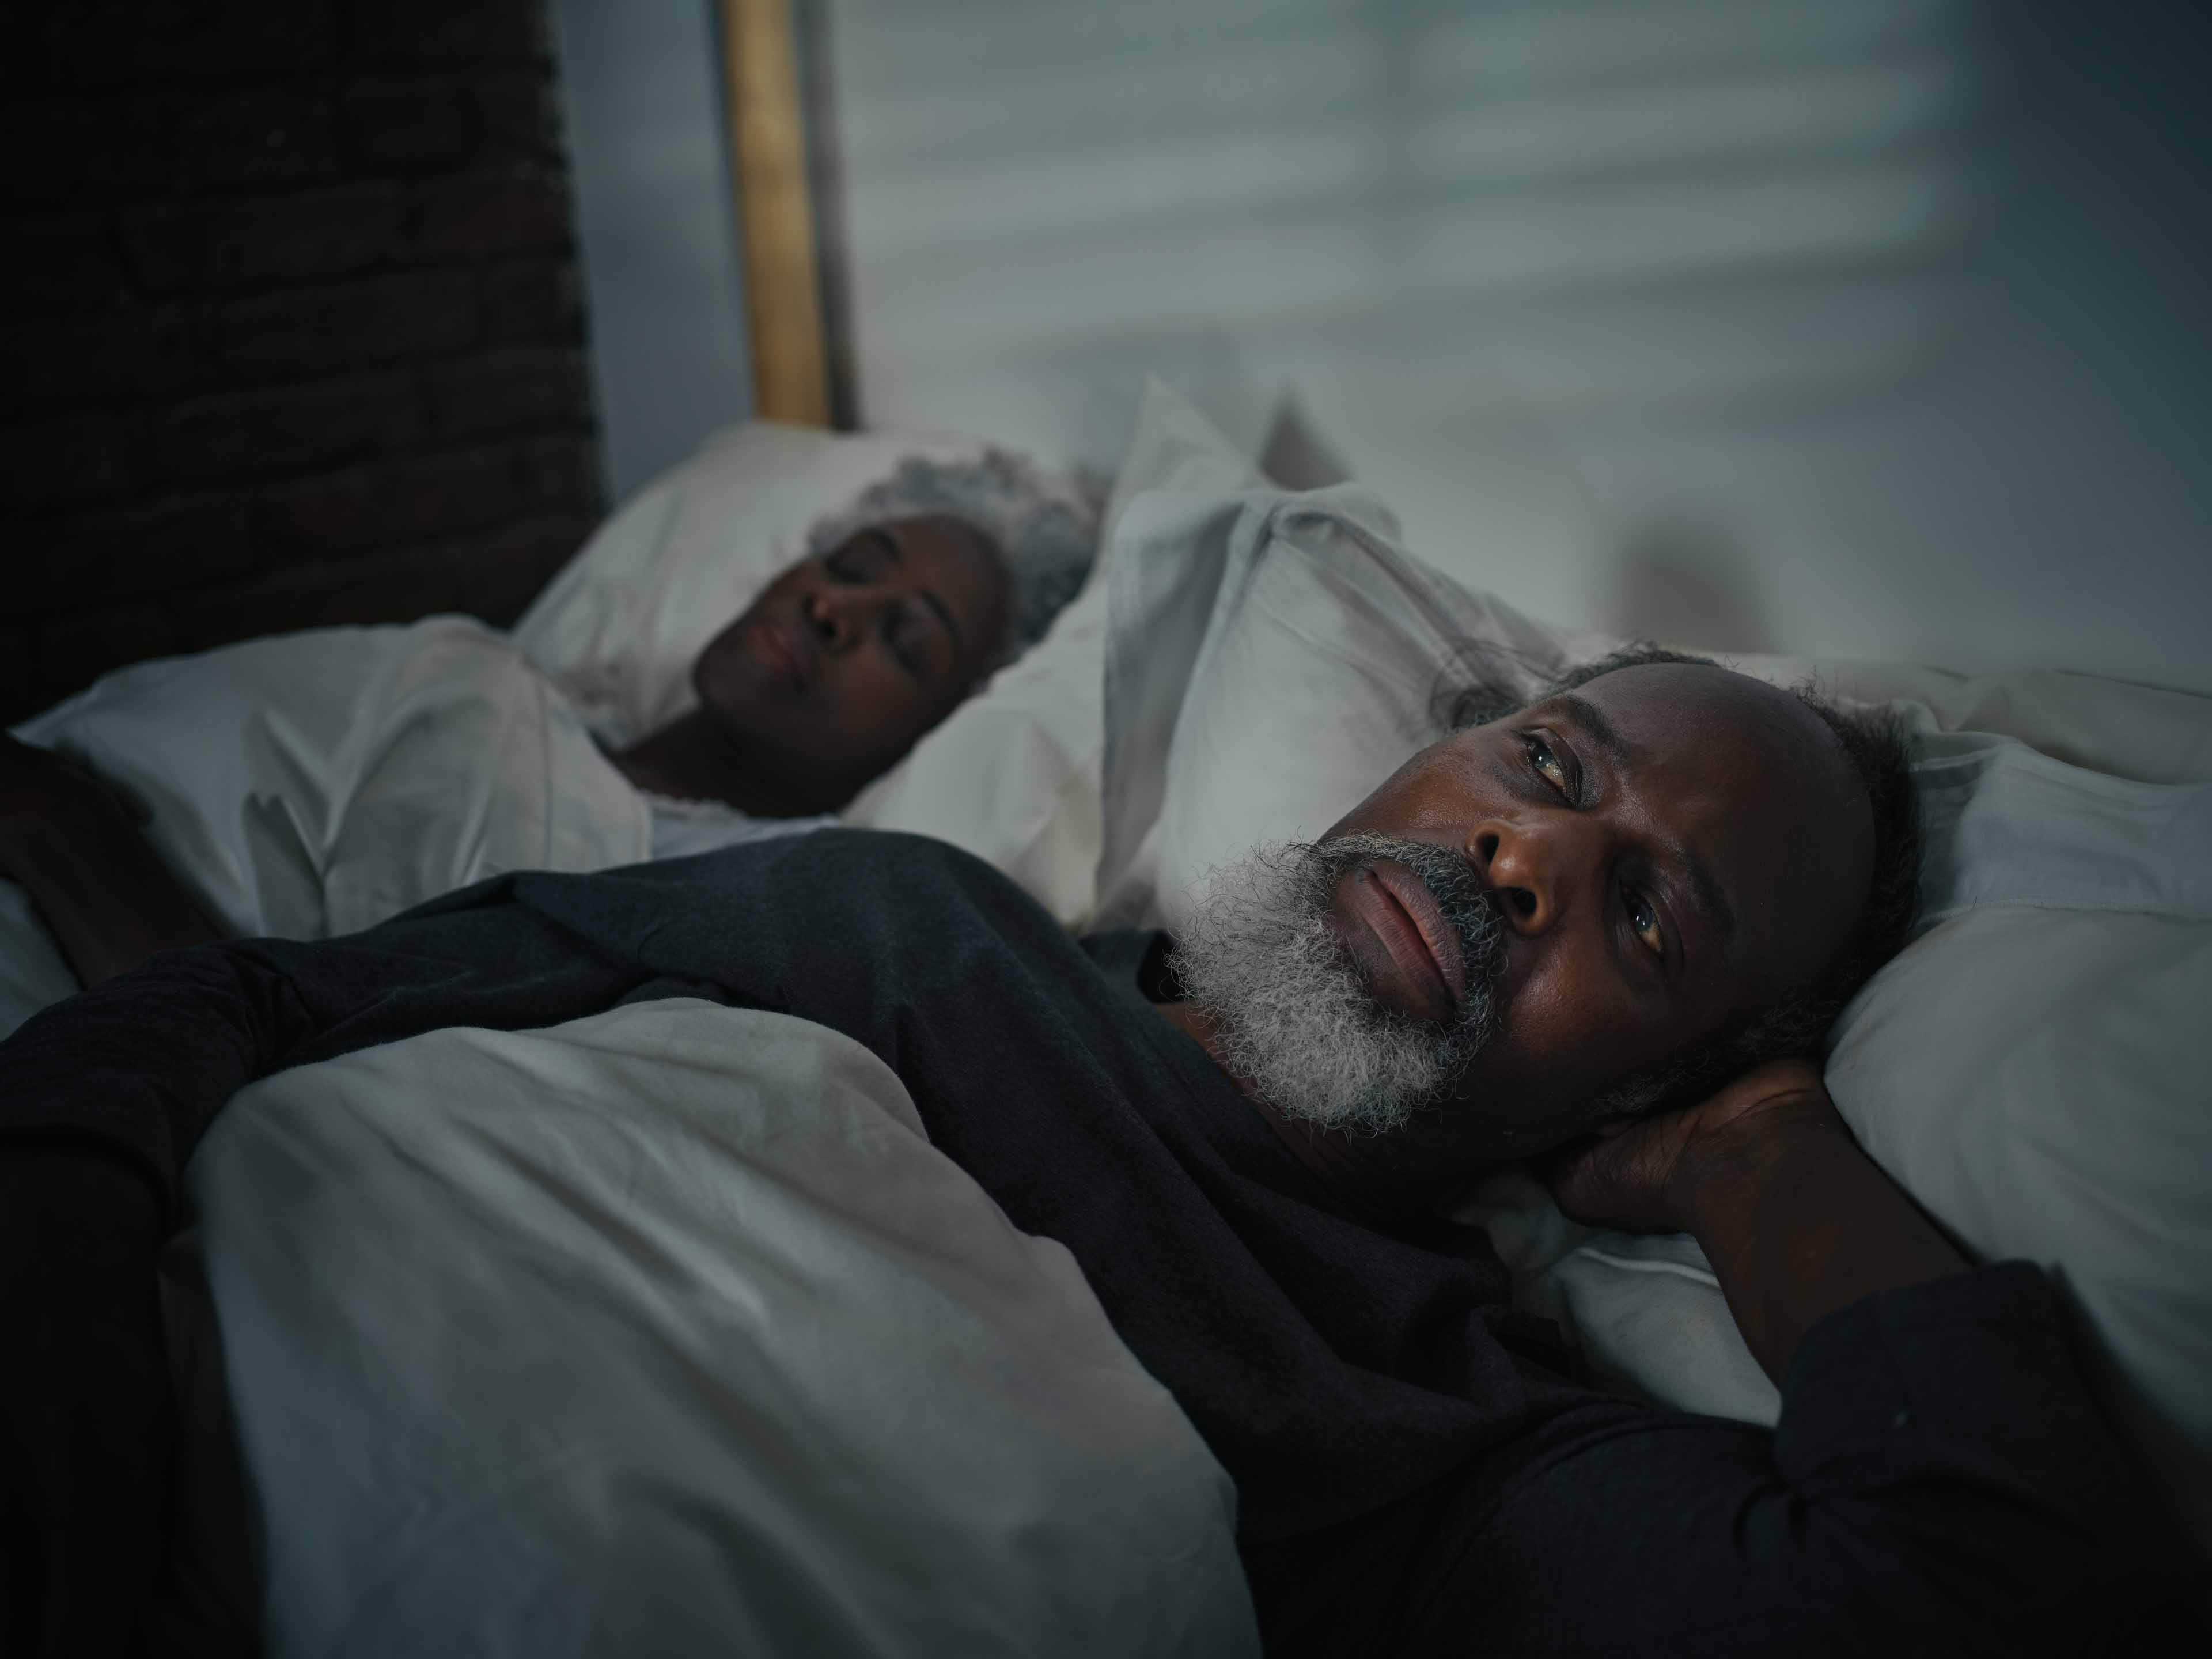 Mature man laying awake in bed while his wife is sound asleep next to him